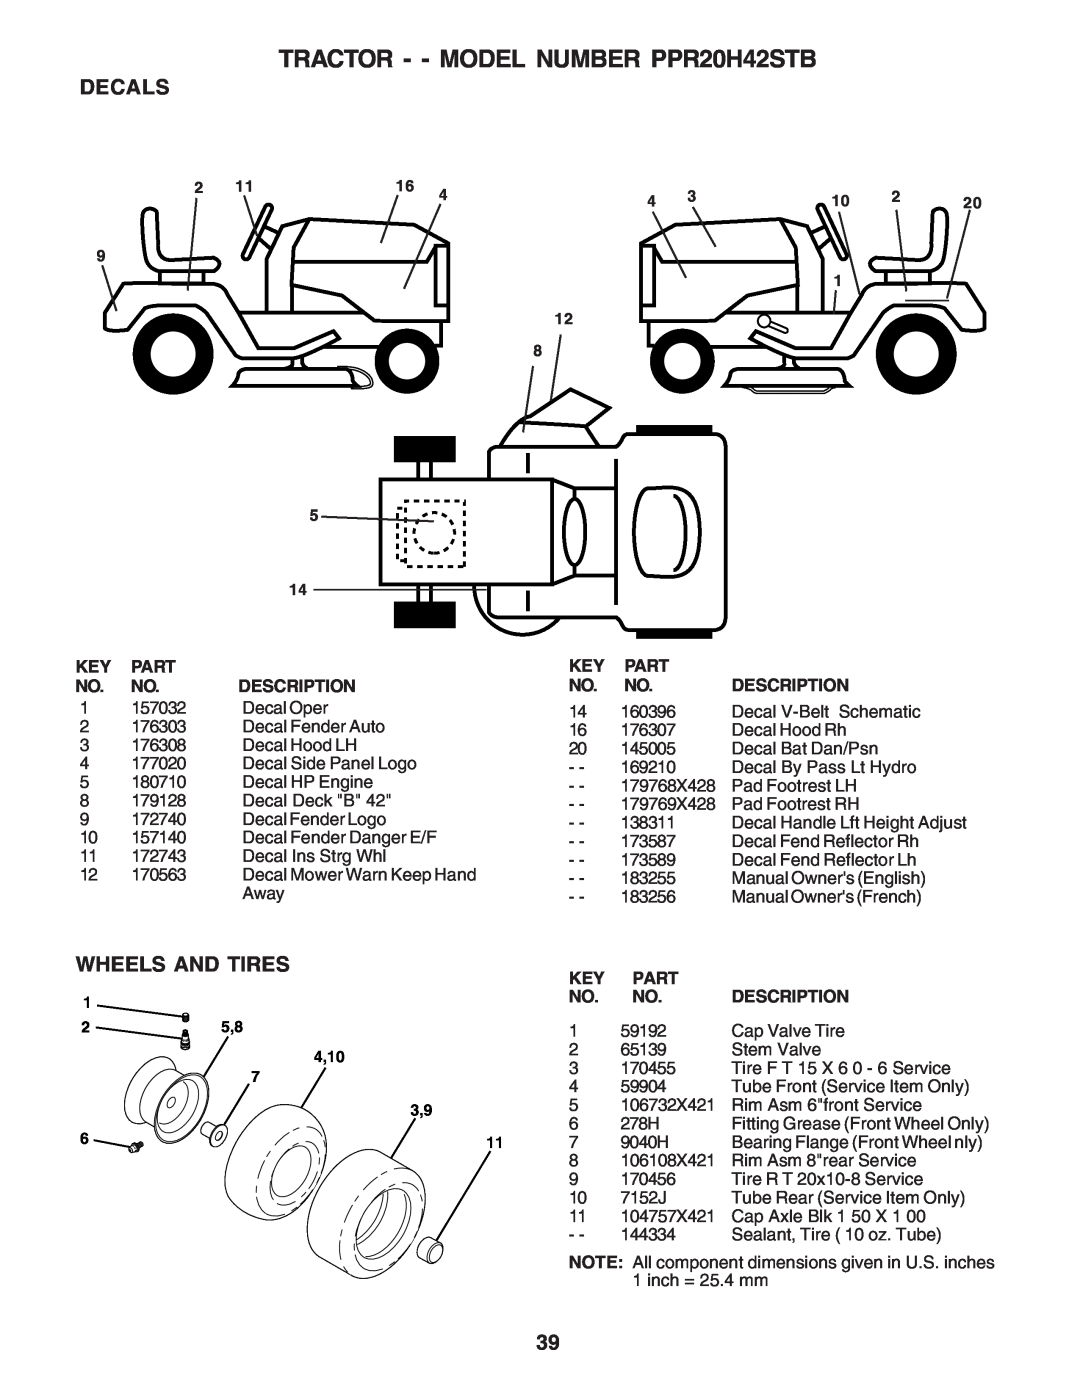 Poulan 183255 owner manual Decals, Wheels And Tires, TRACTOR - - MODEL NUMBER PPR20H42STB, 25,8 4,10 